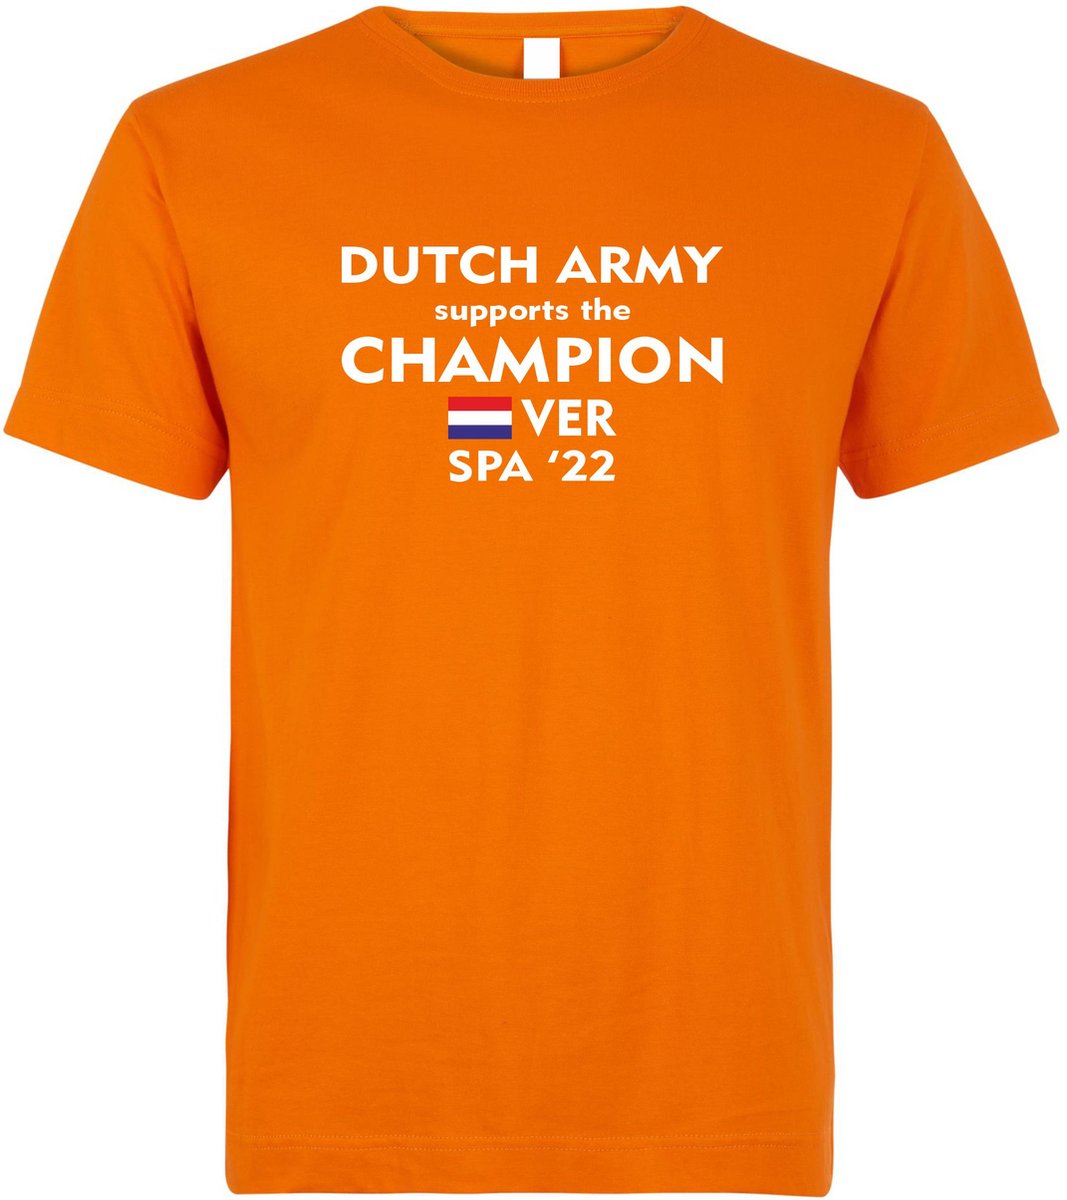 T-shirt kinderen Dutch Army supports the Champion Spa 22 | Max Verstappen / Red Bull Racing / Formule 1 fan | Grand Prix Circuit Spa-Francorchamps | kleding shirt | Oranje | maat 140